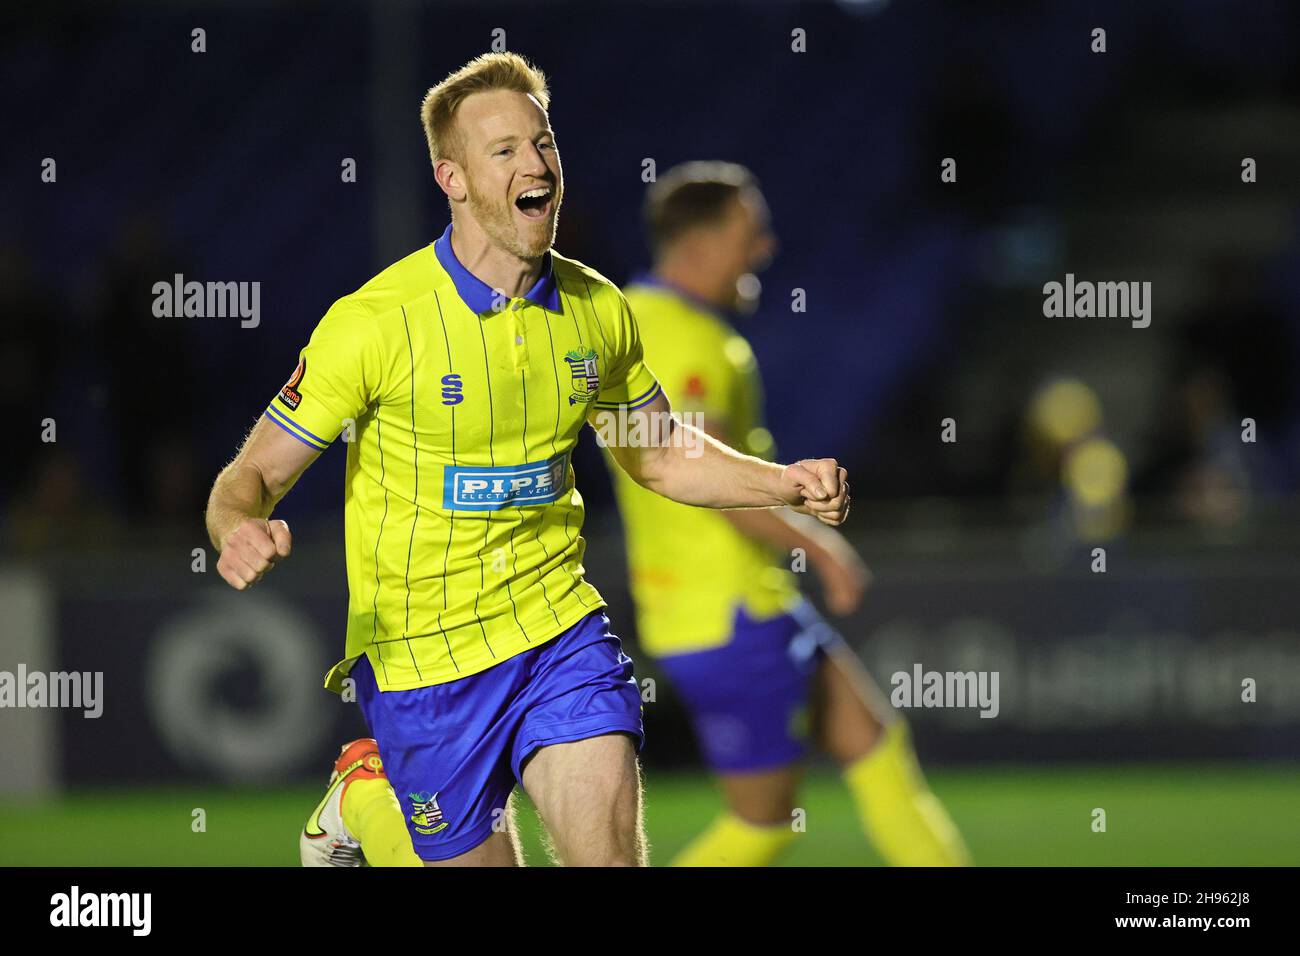 SOLIHULL, ENGLAND. DECEMBER 4TH 2021. Adam Rooney of Solihull Moors celebrates after scoring their teams second goal from the penalty spot during the Vanarama National League match between Solihull Moors and Woking FC at the Armco Stadium, Solihull on Saturday 4th December 2021. (Credit: James Holyoak/Alamy Live News) Stock Photo